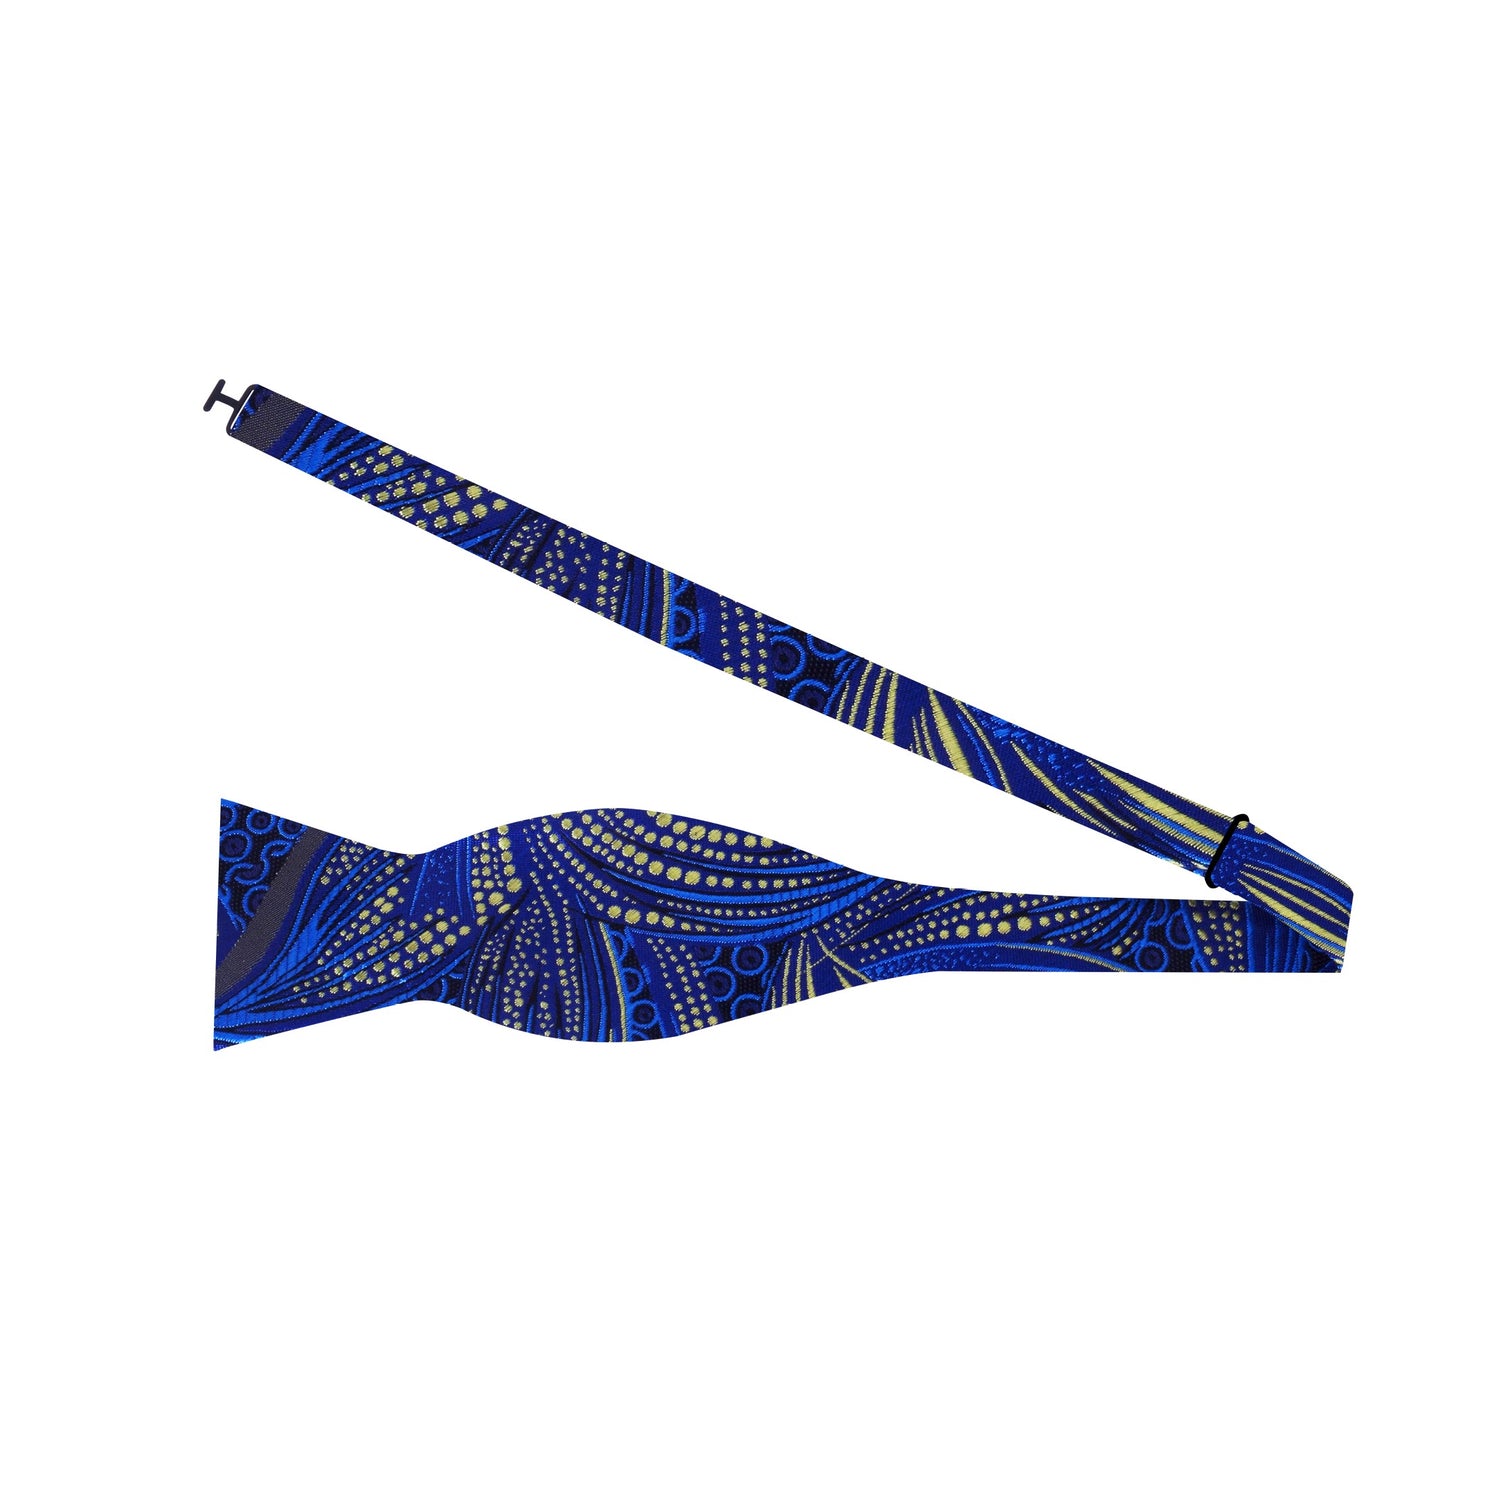 Acclaimed Abstract Self-Tie Bow Tie